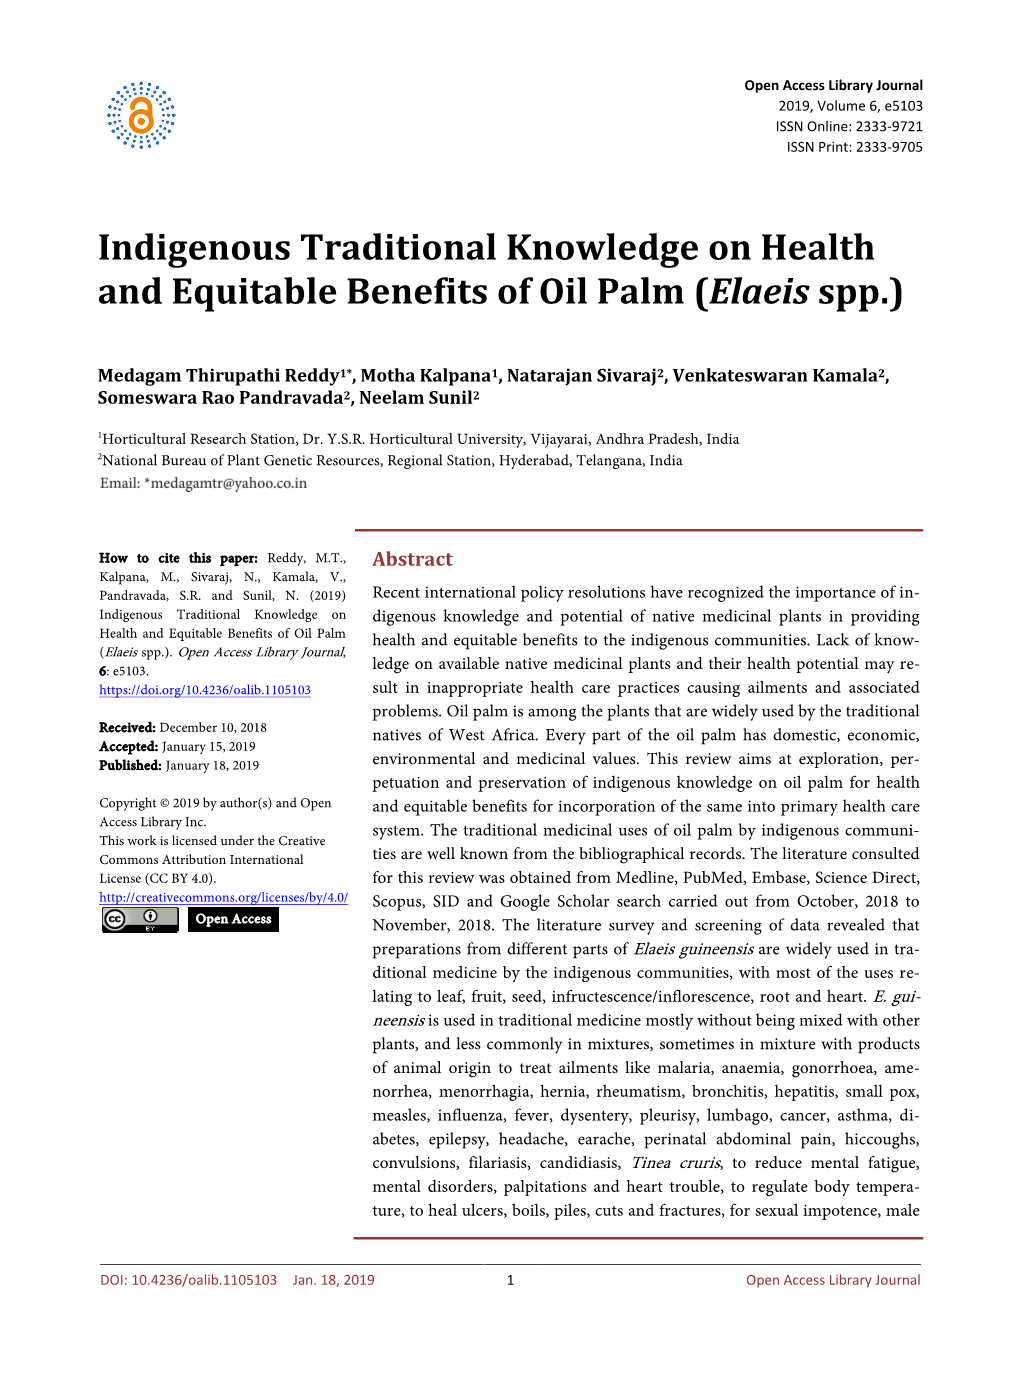 Indigenous Traditional Knowledge on Health and Equitable Benefits of Oil Palm (Elaeis Spp.)